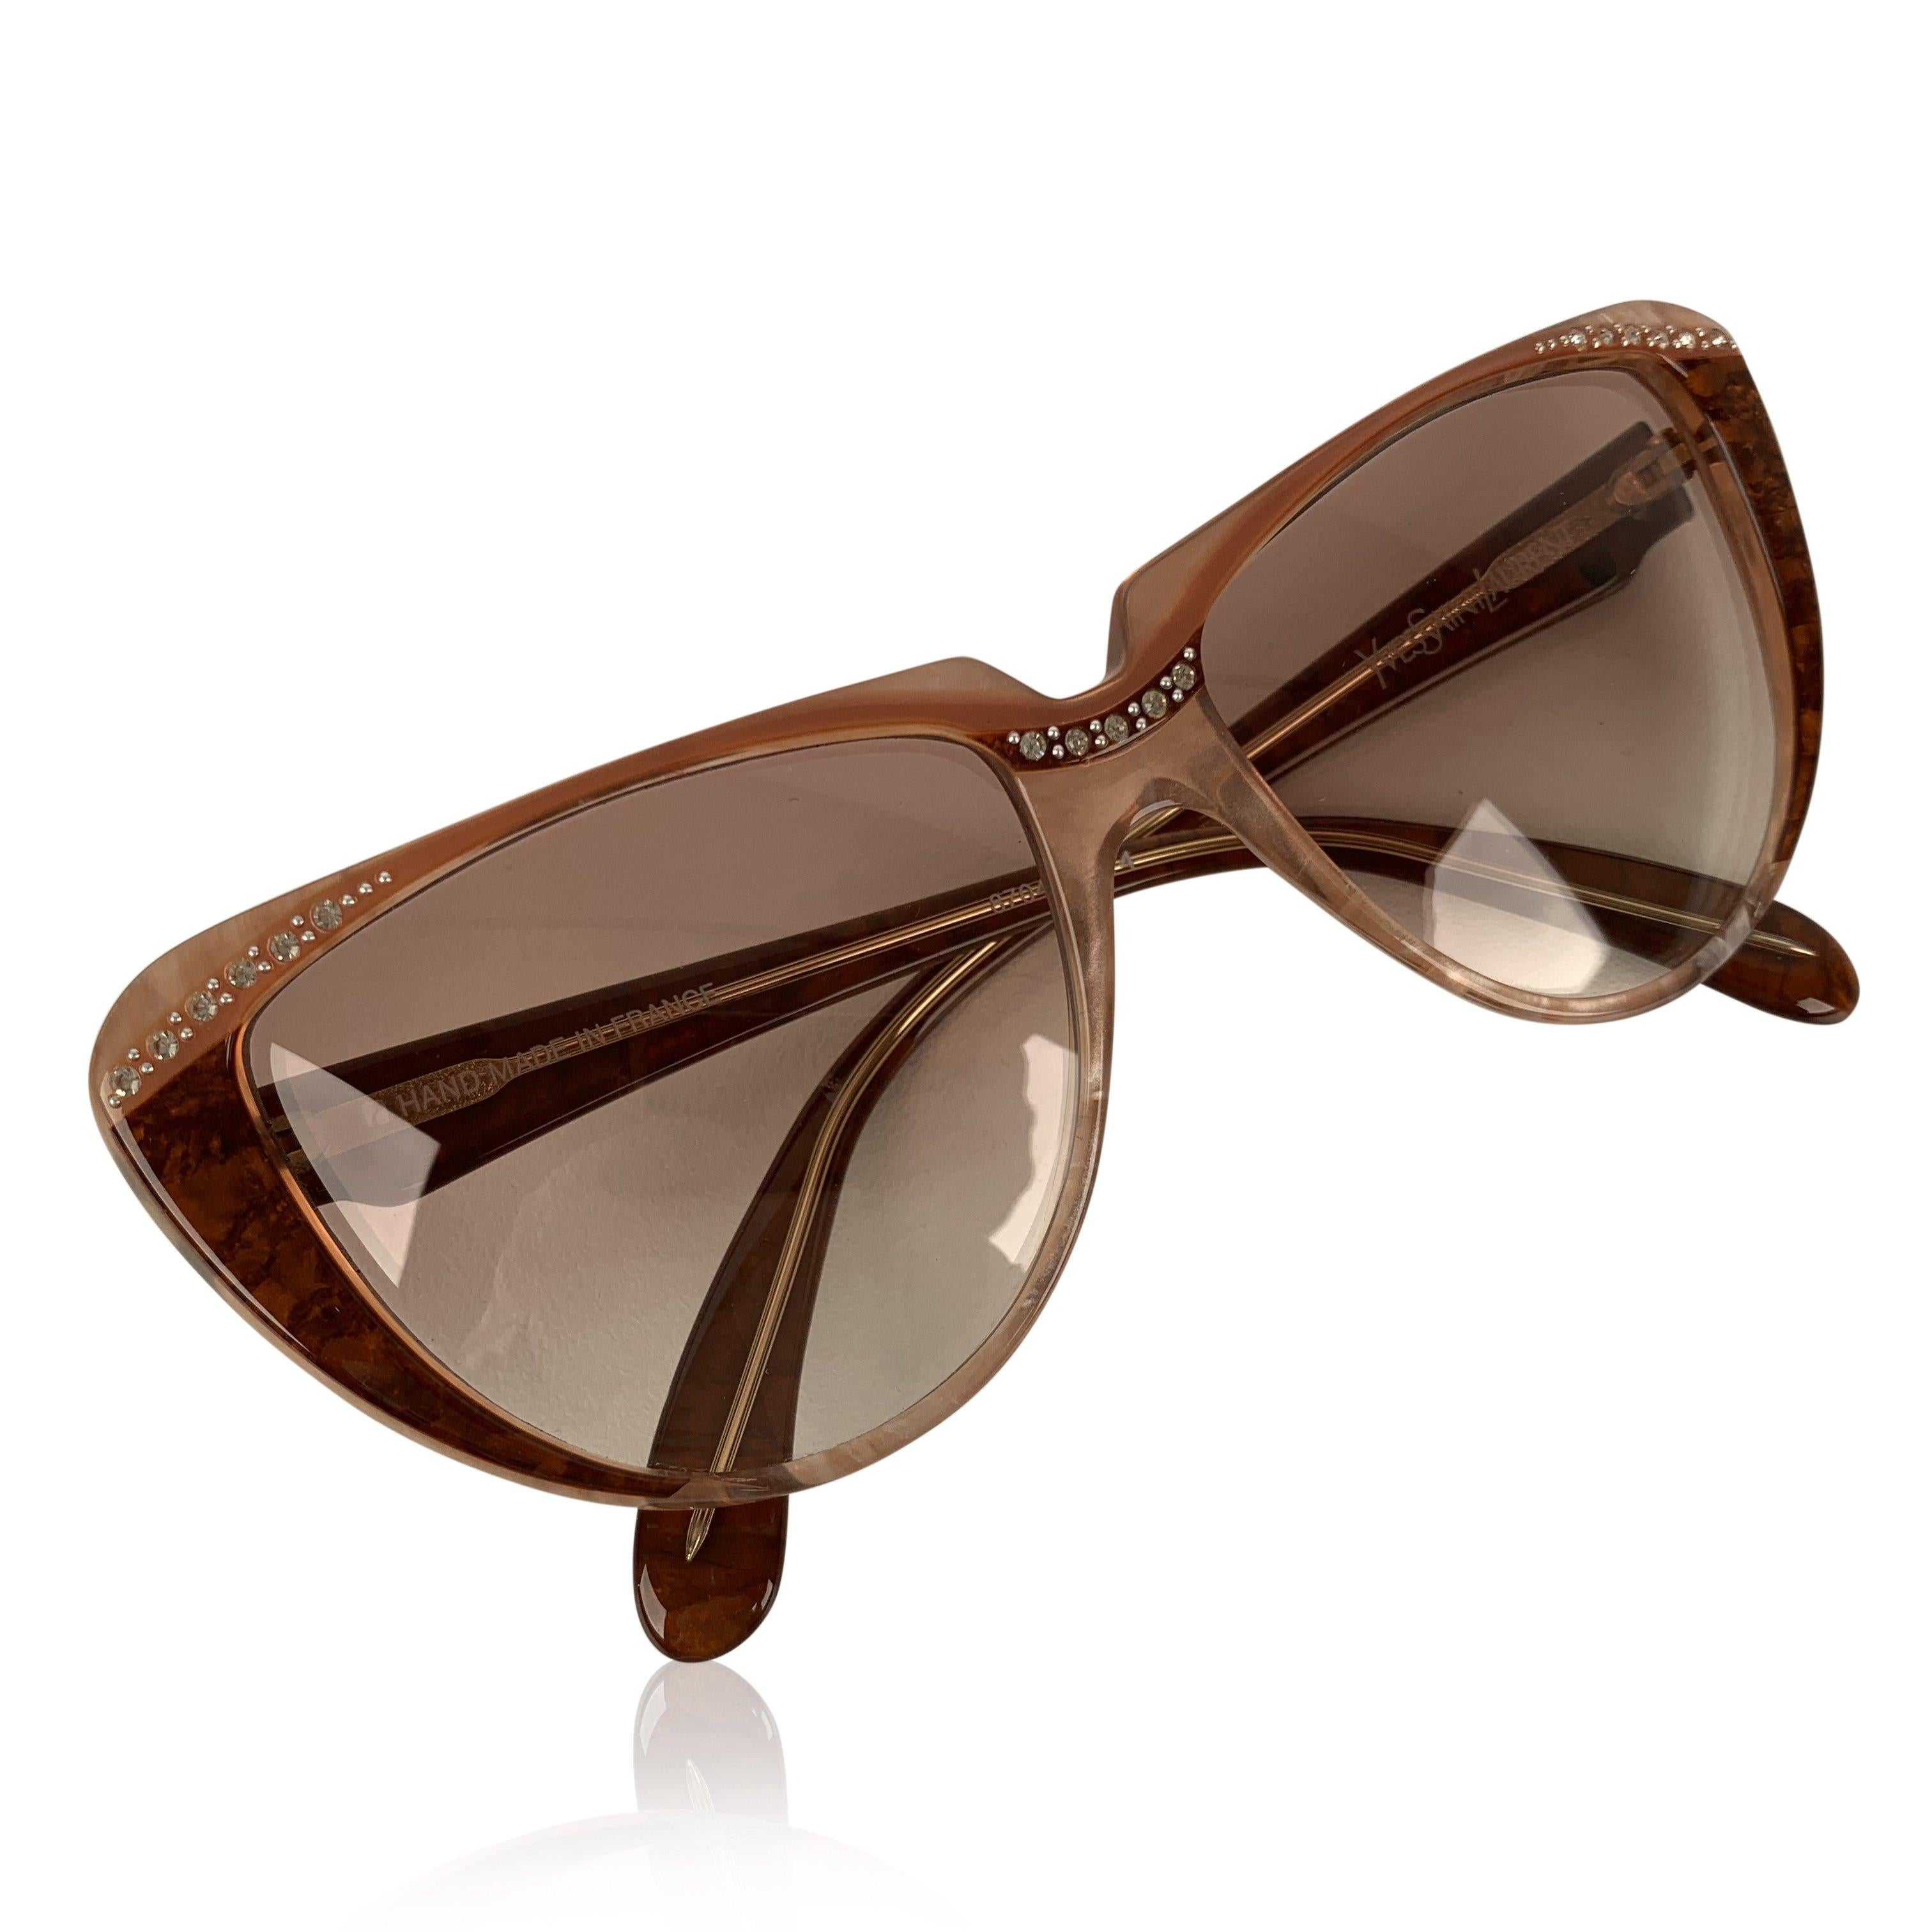 Cat-eye vintage sunglasses by YVES SAINT LAURENT from the 80s, Mod. 8704 PO 74. Pink and brown frame embellished with small rhinestones on the nose bridge amd on corners. Hand-Made in France. YSL logos on the side. New 100% UV protection gradient